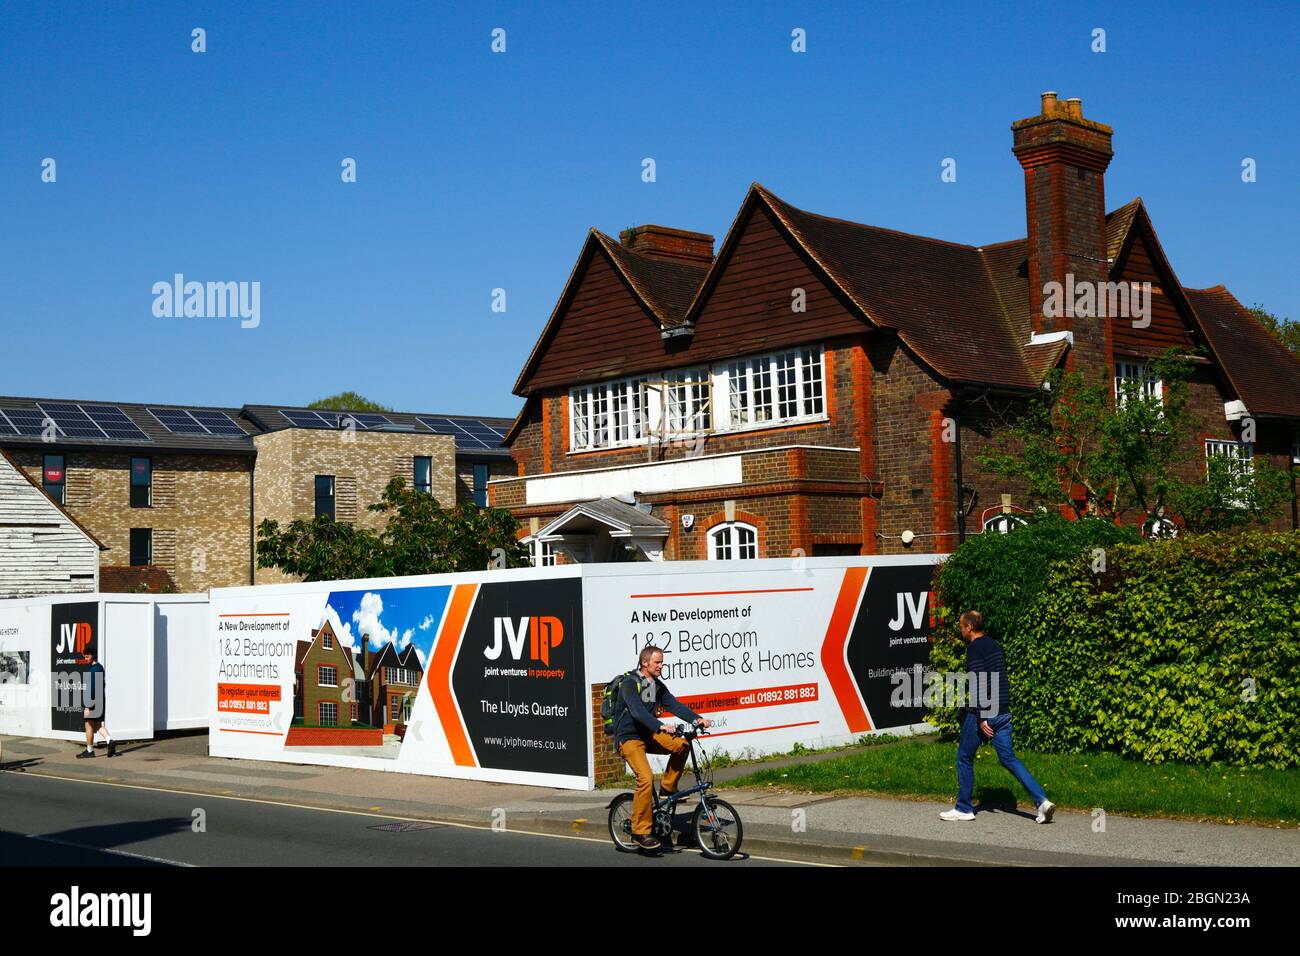 JVIP property developer signs outside project to convert the former Lloyds Bank building into flats, Southborough, Kent, England Stock Photo